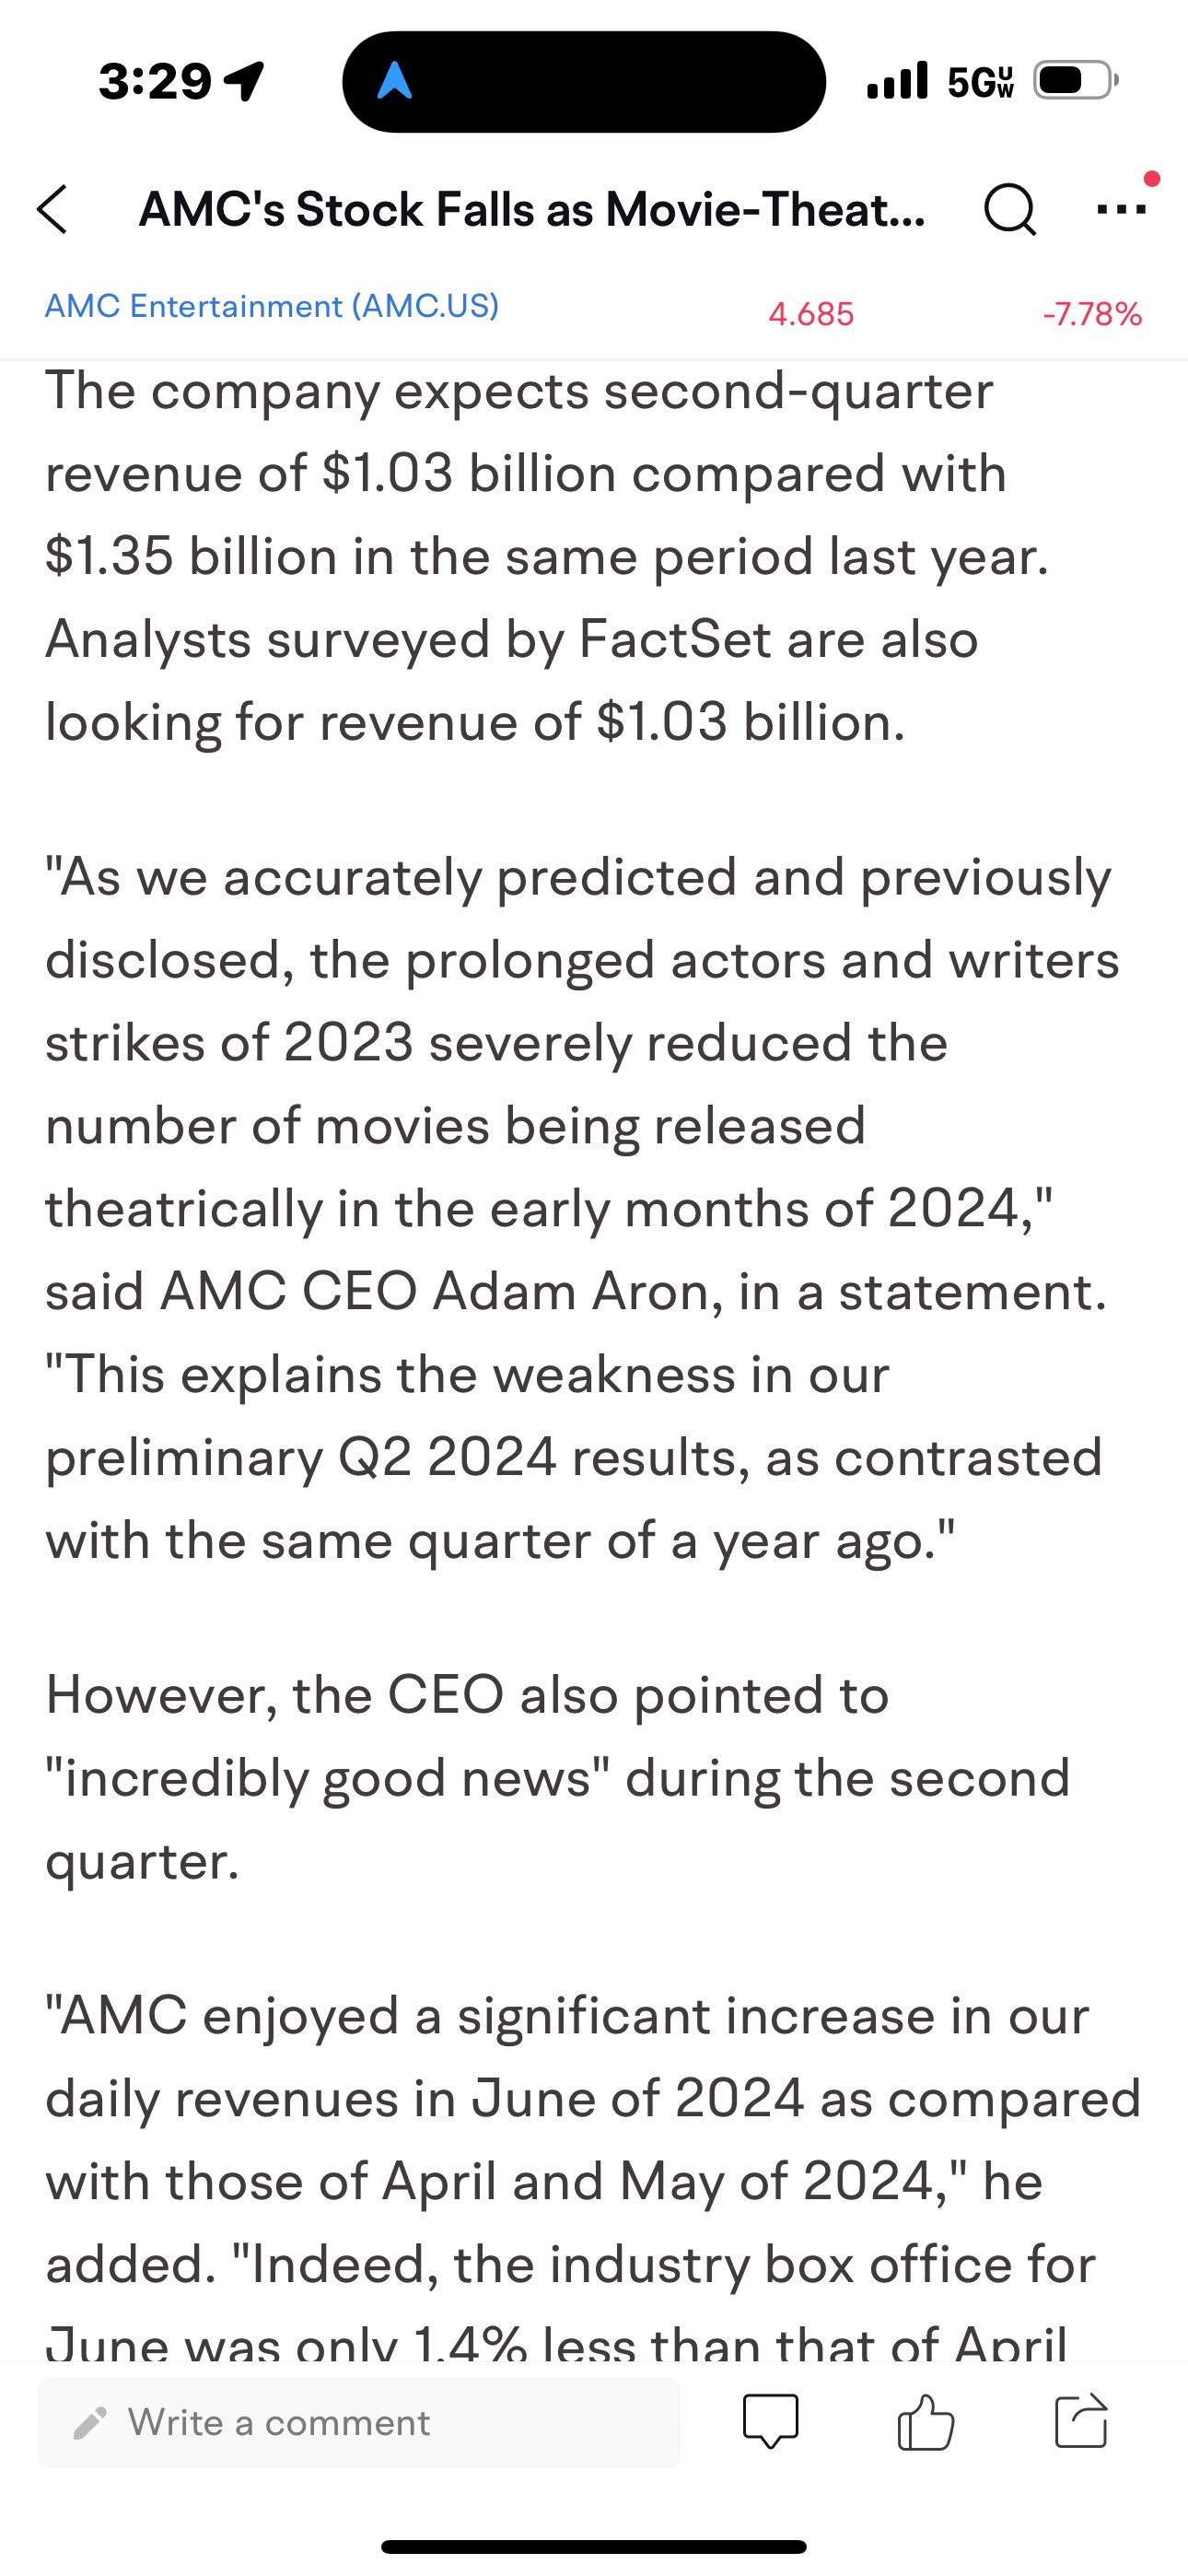 Not looking good for AMC